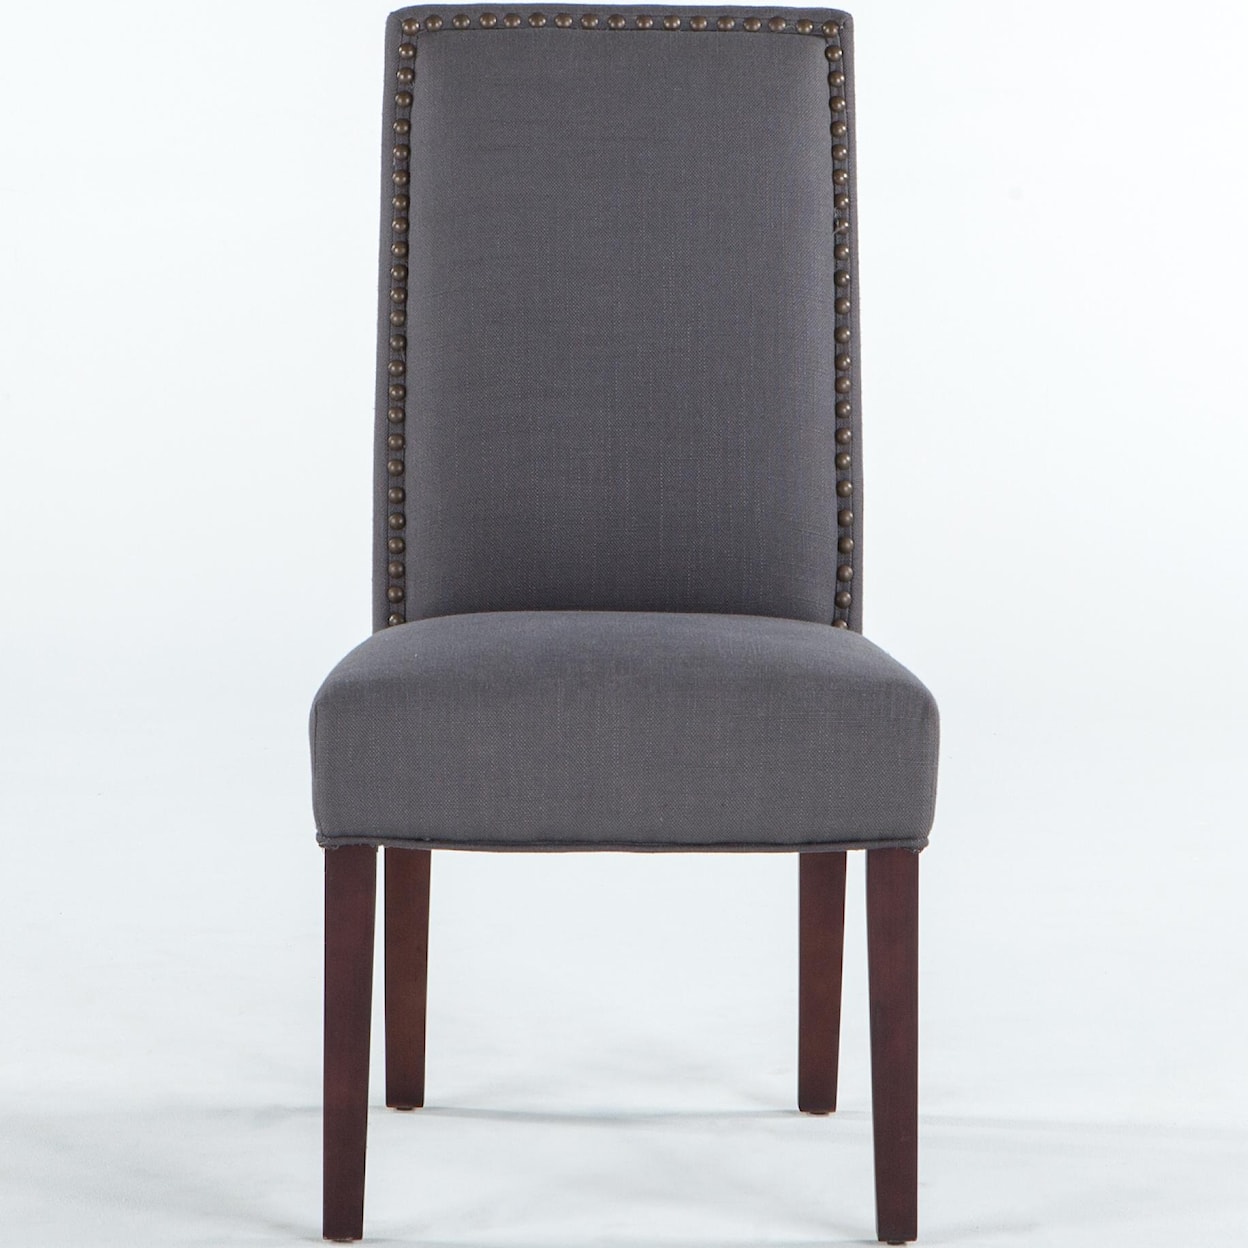 Home Trends & Design G206 Dining Side Chair